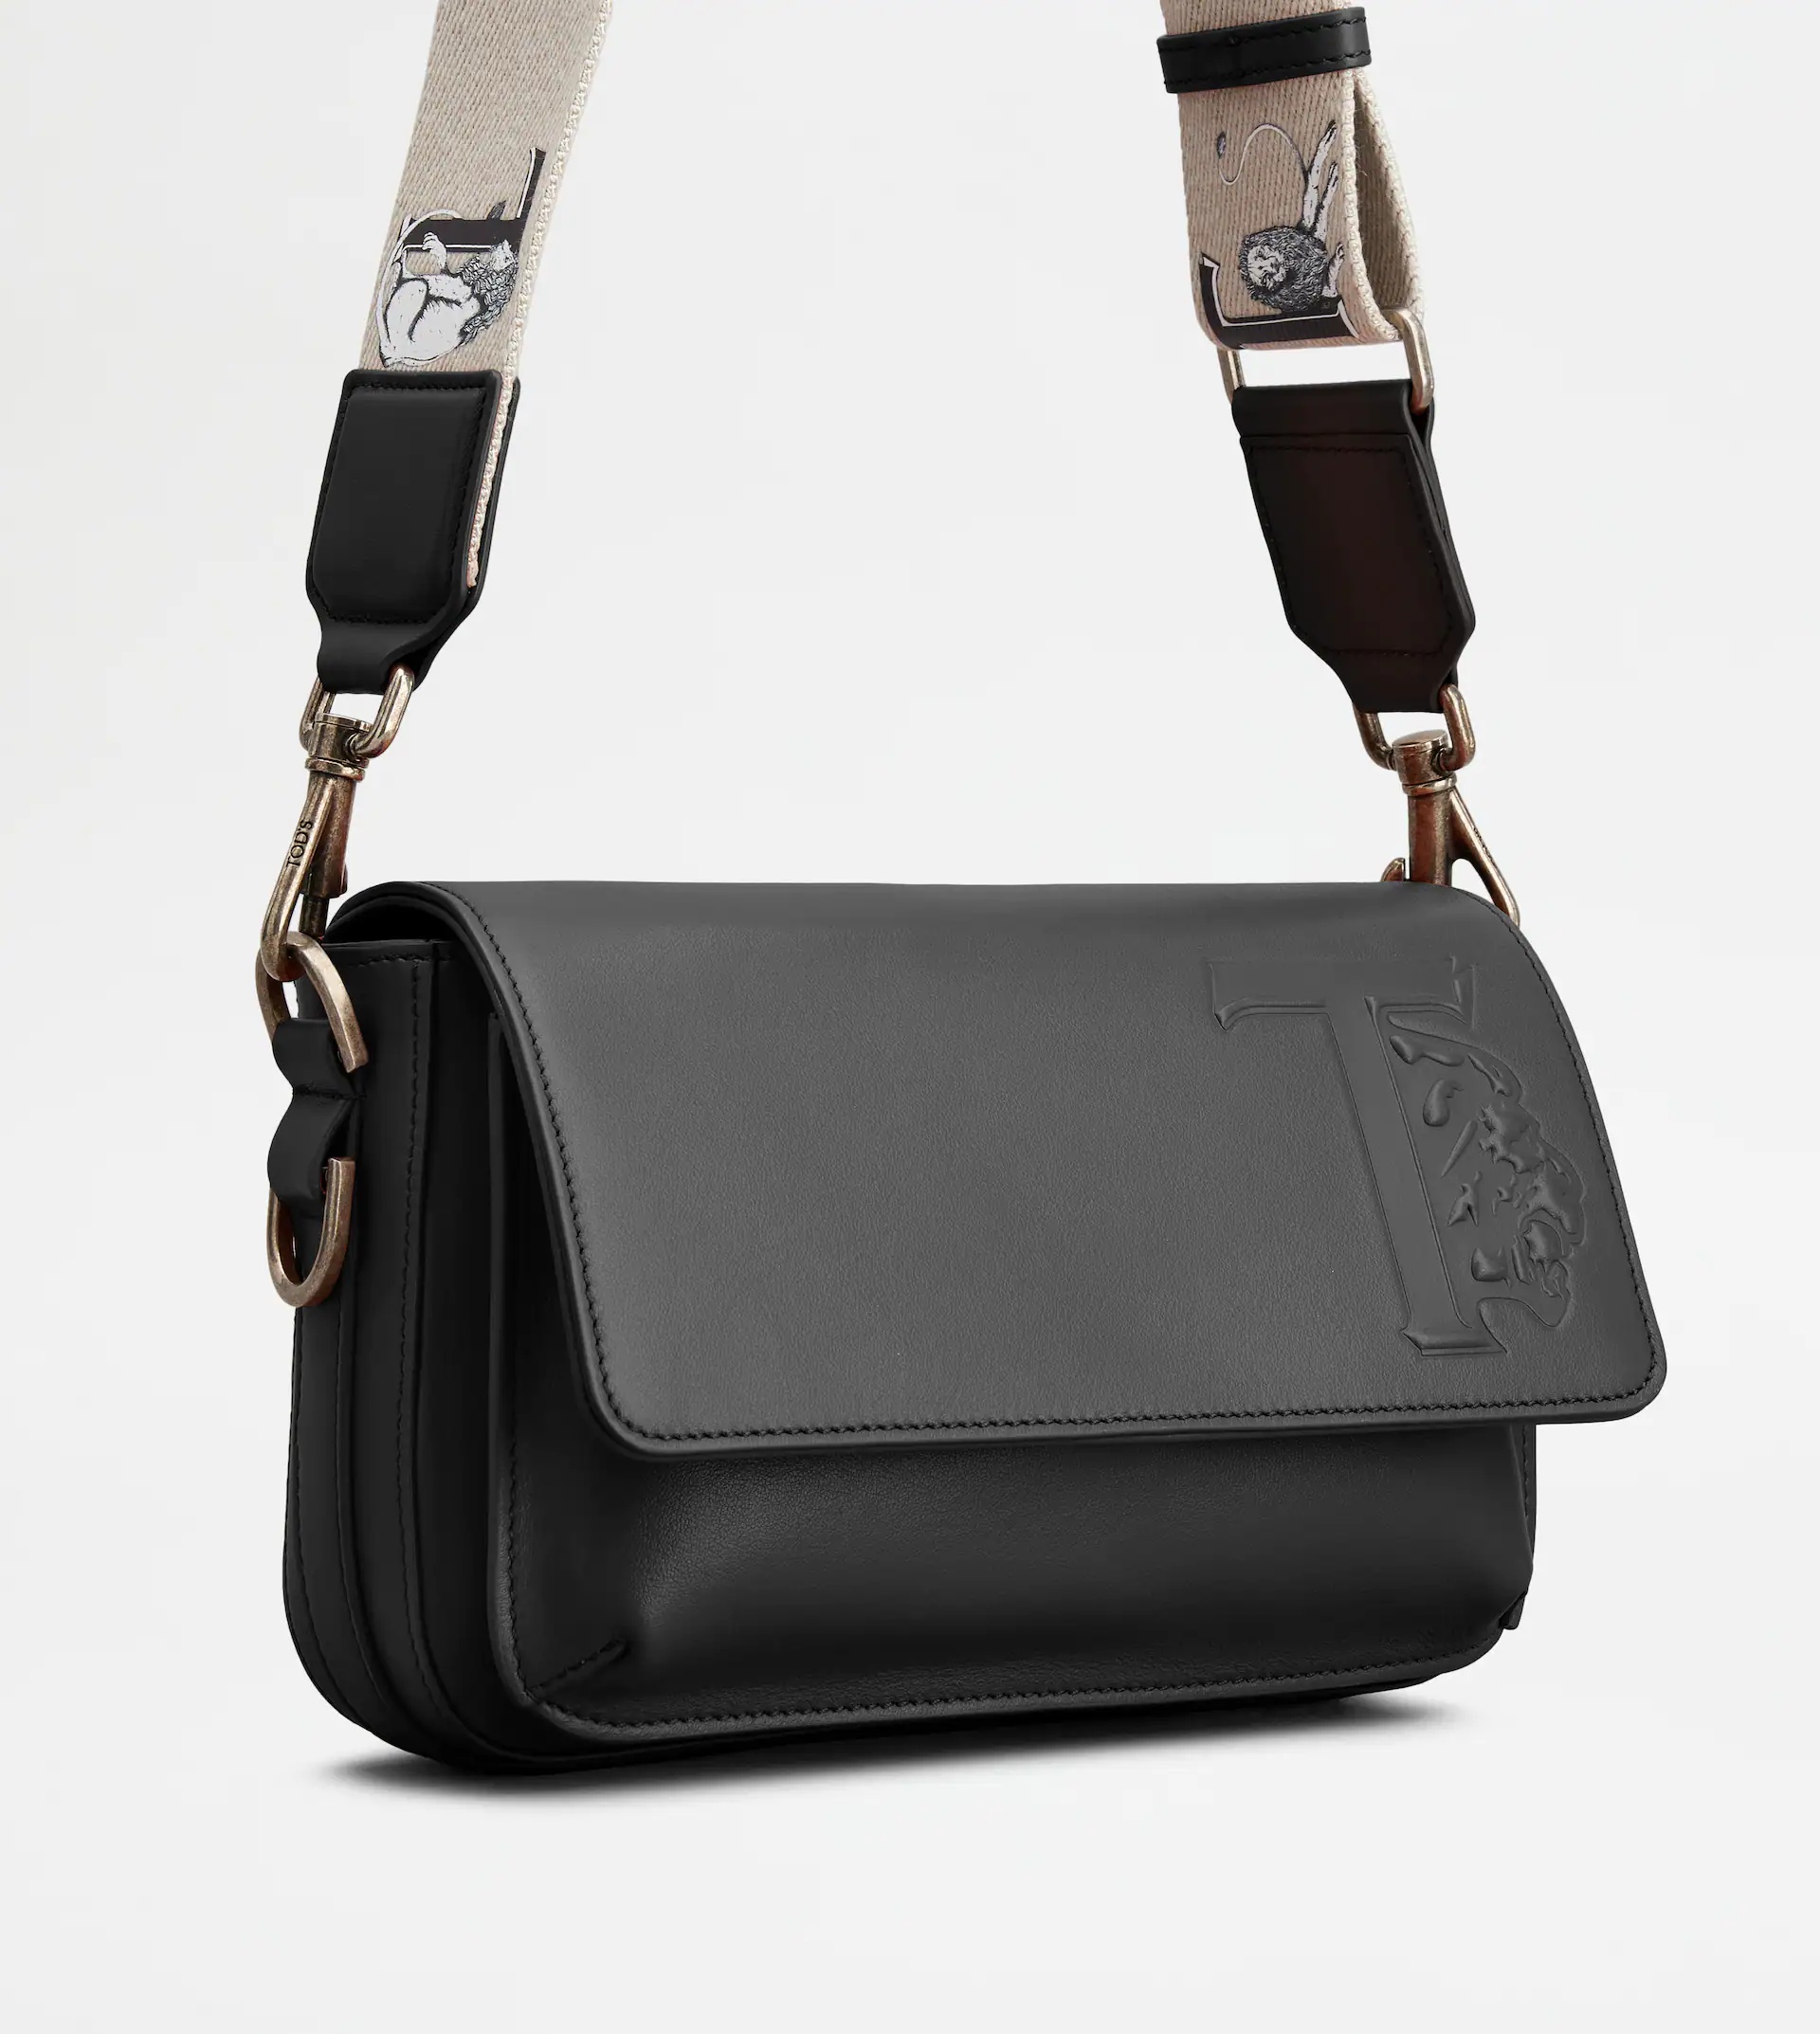 TOD'S CROSSBODY BAG IN LEATHER SMALL - BLACK - 2